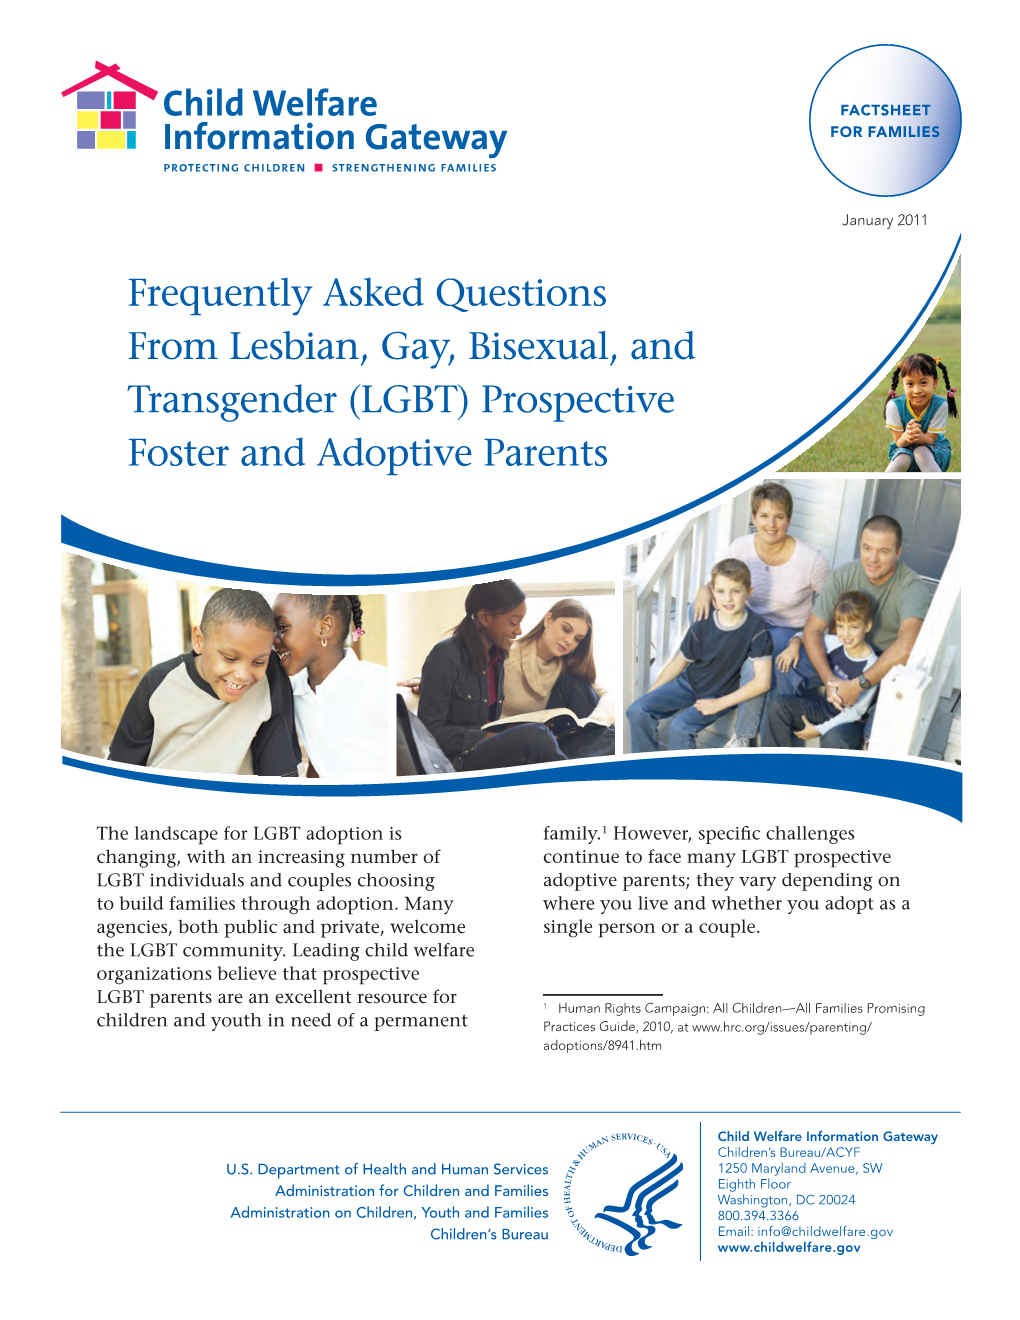 (LGBT) Prospective Foster and Adoptive Parents